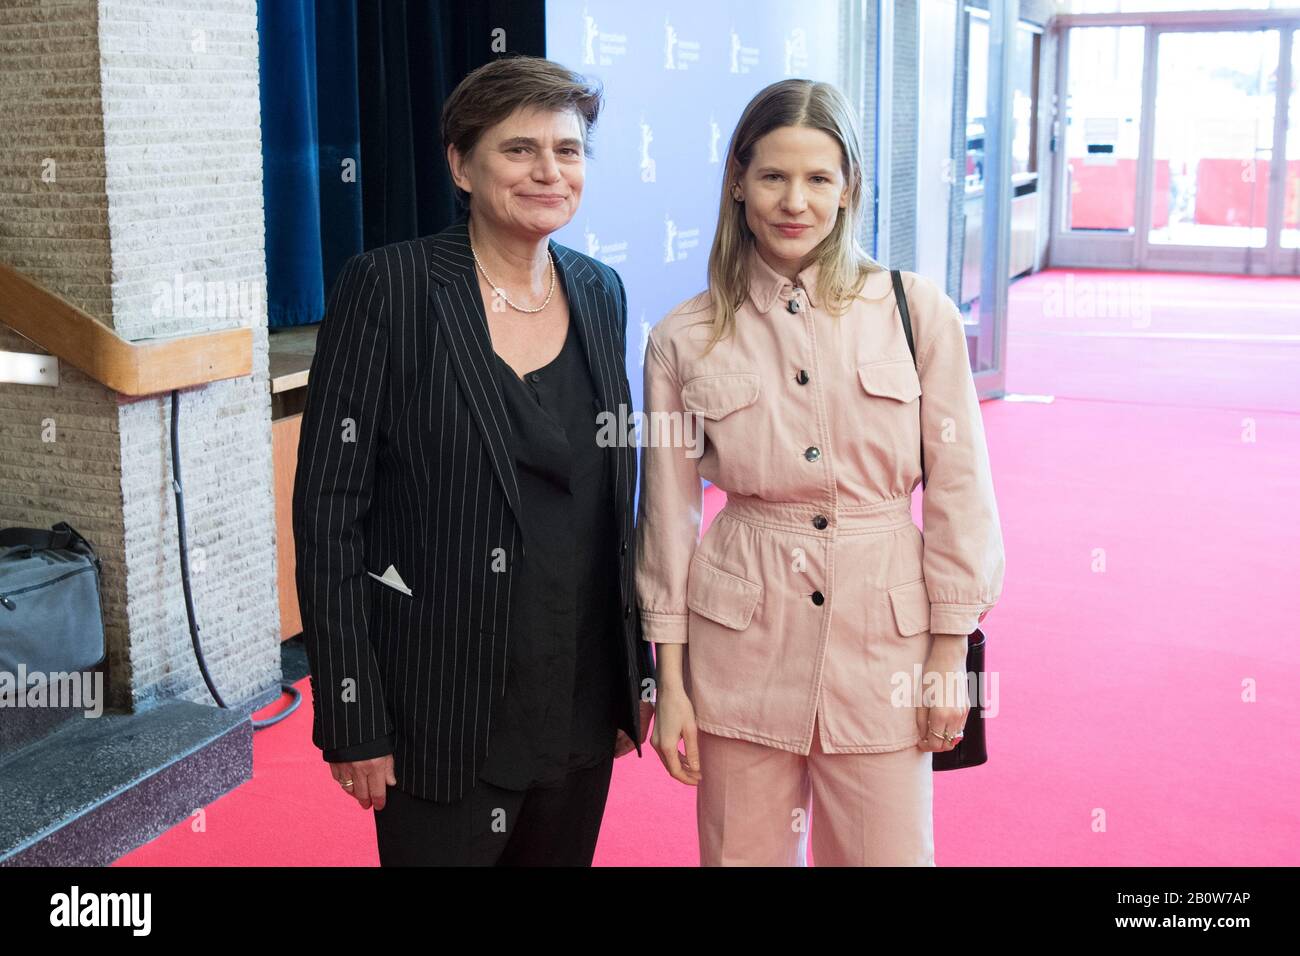 Berlin, Germany. 21st Feb, 2020. 70th Berlinale, Panorama Dokumente, 'Schlingensief - A Voice that Shook the Silence' : Bettina Böhler (l), filmmaker, and Aino Laberenz, widow of the late filmmaker Christoph Schlingensief, come to the premiere. The International Film Festival takes place from 20.02. to 01.03.2020. Credit: Jšrg Carstensen/dpa/Alamy Live News Stock Photo